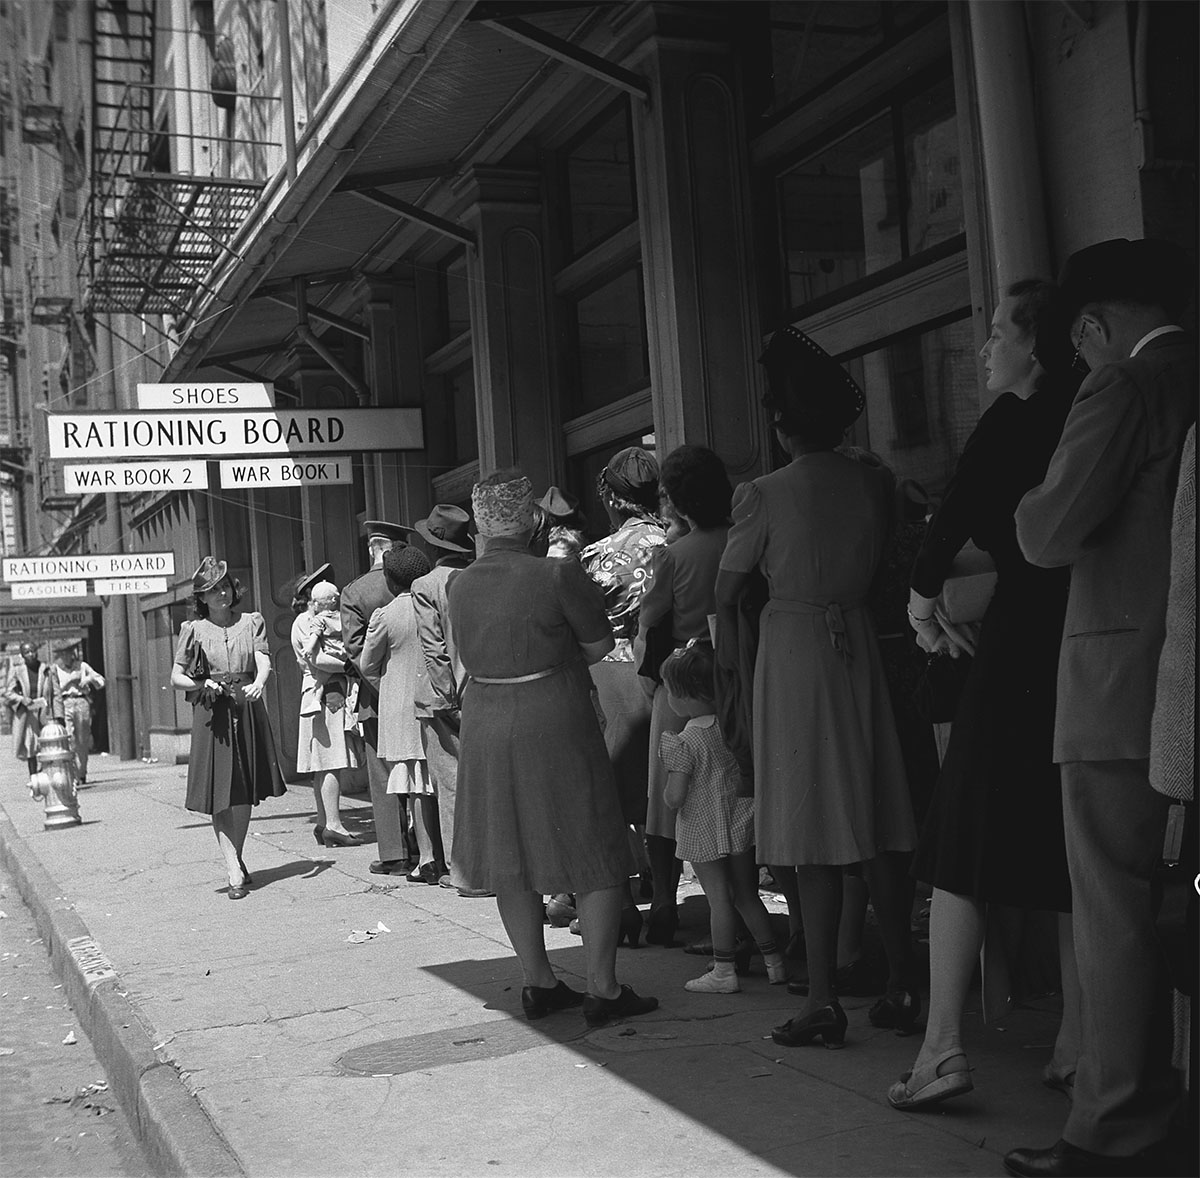 New Orleans, Louisiana, 1943. Line at Rationing Board during World War II, March 1943 - Library of Congress<p>© John Vachon</p>